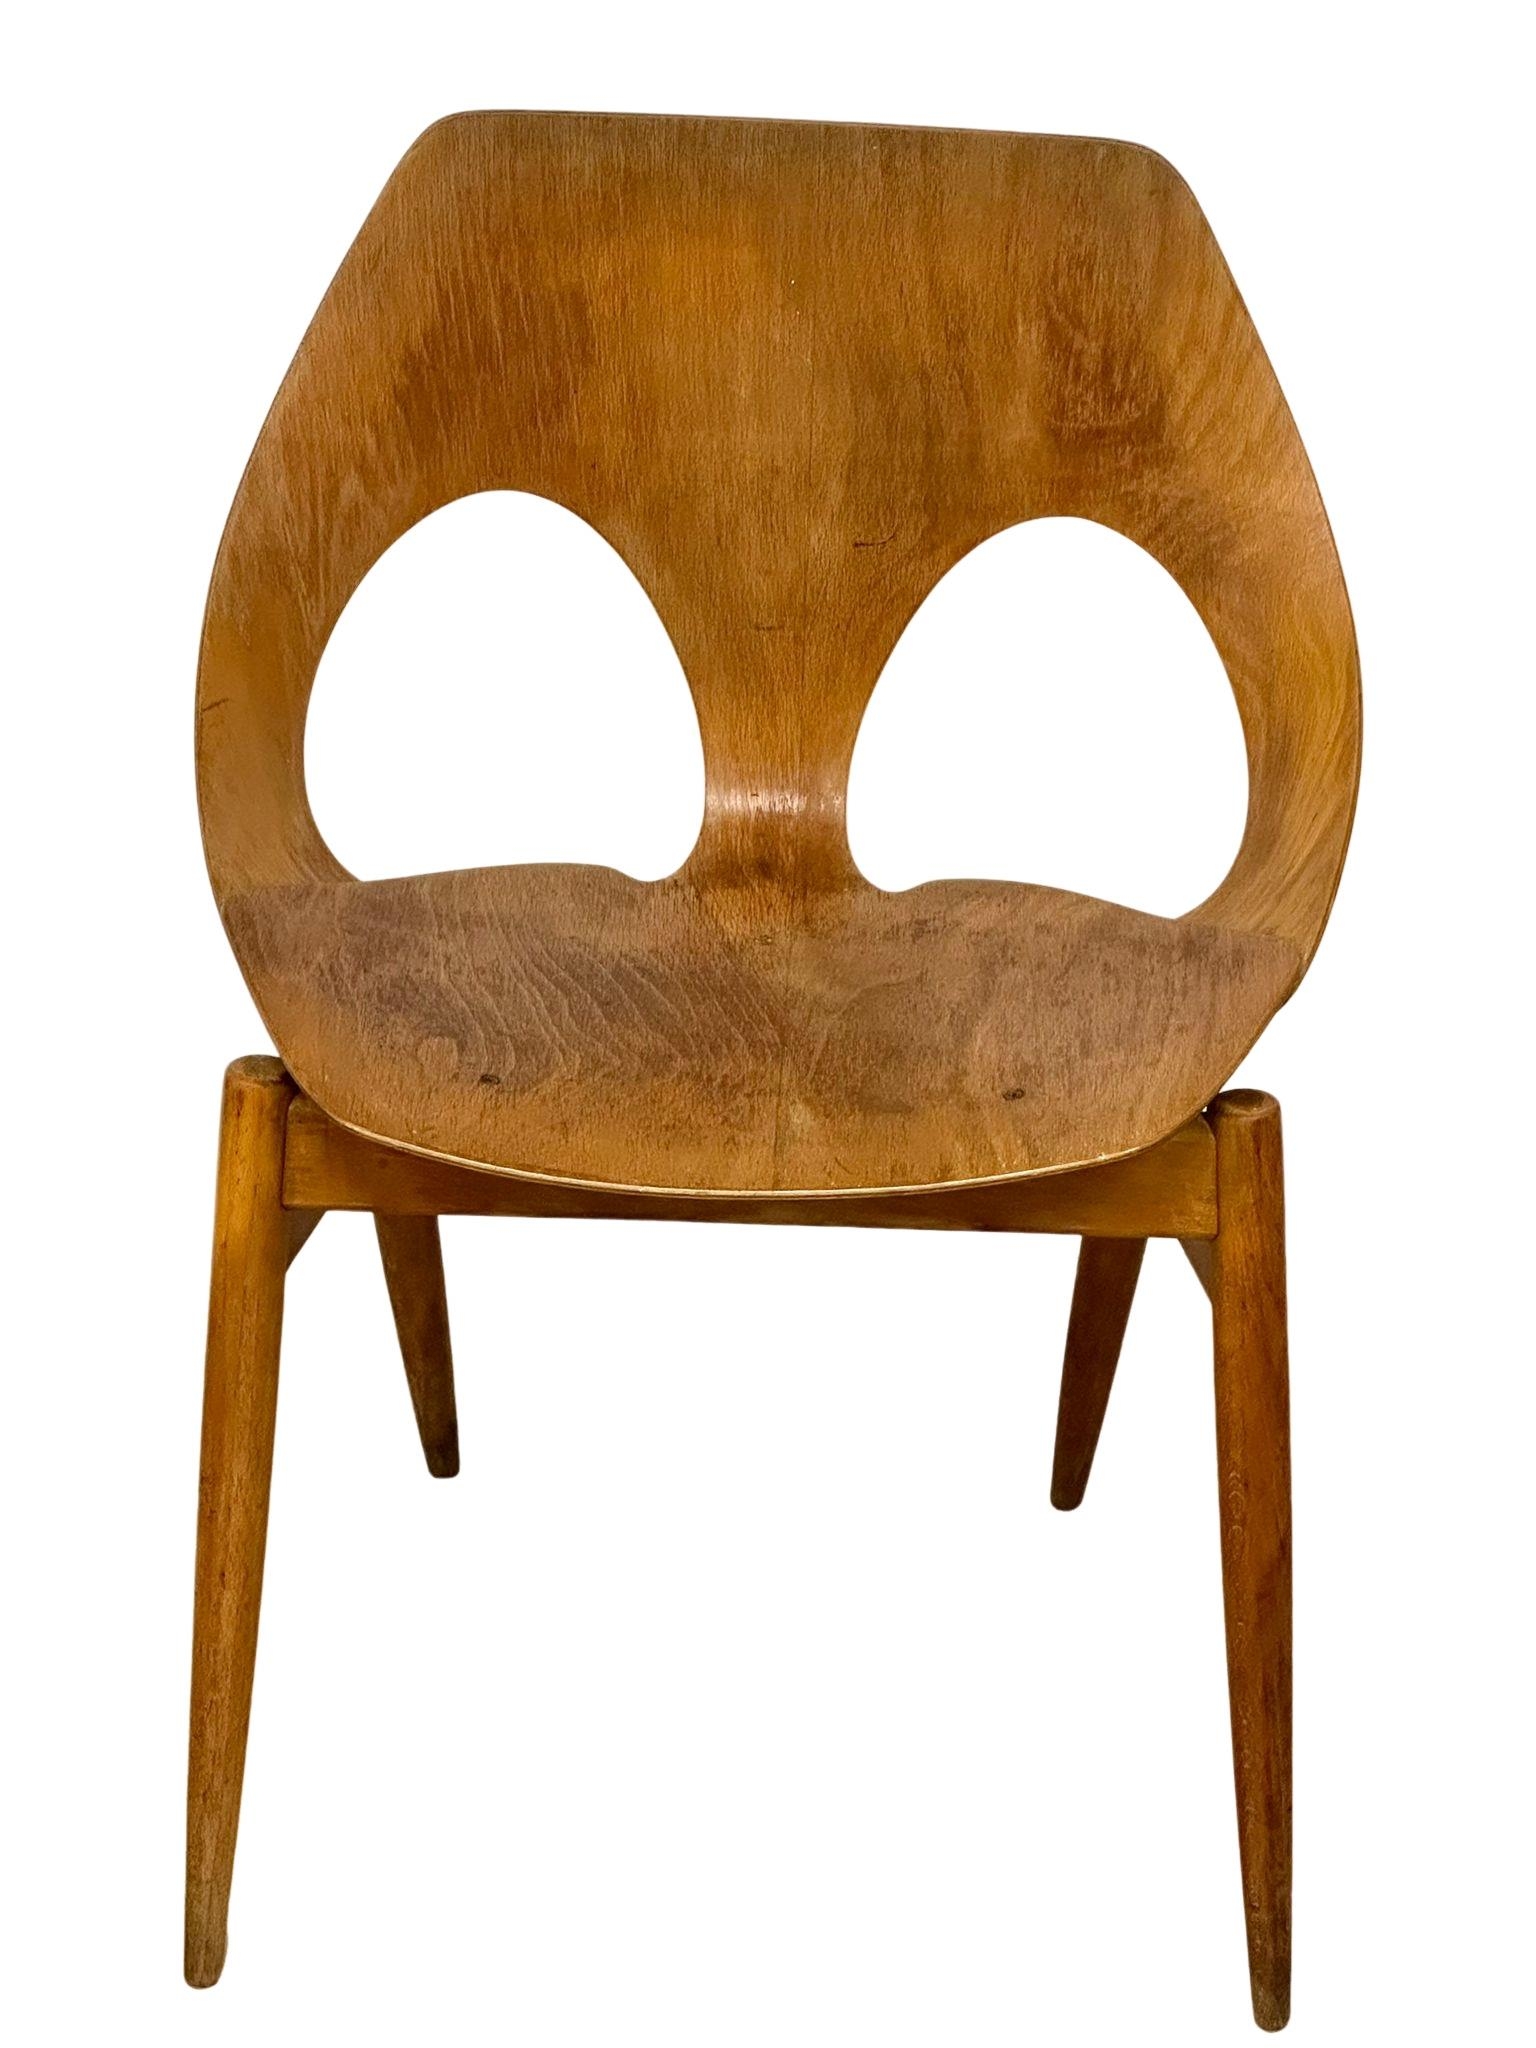 A rare set of 4 "Jason" chairs designed by Carl Jacobs for Kandya. - Image 2 of 9